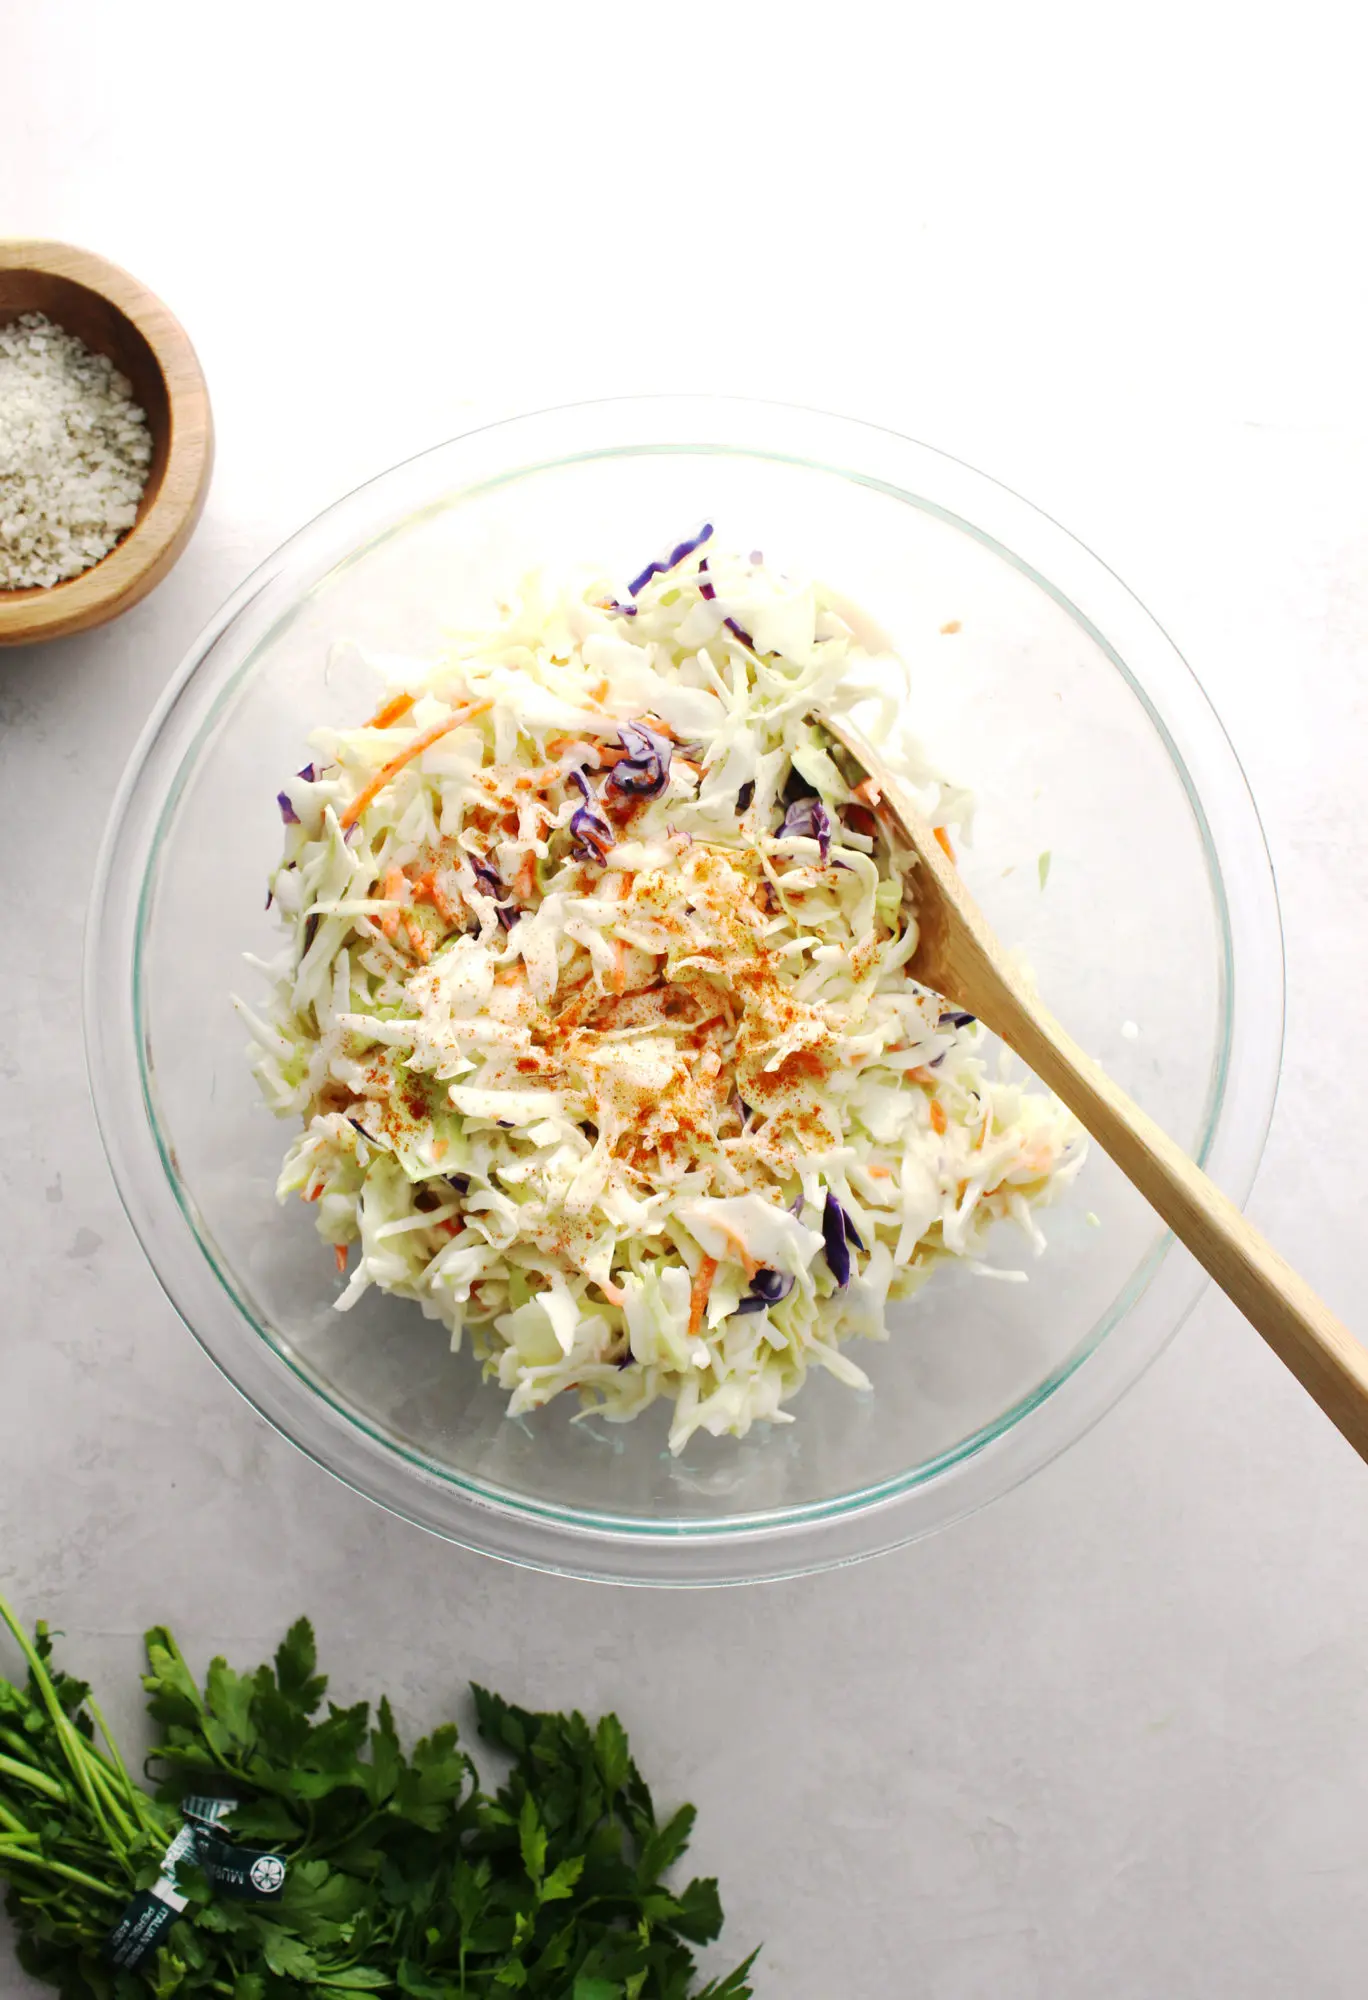 coleslaw in a clear glass bowl with wooden spoon